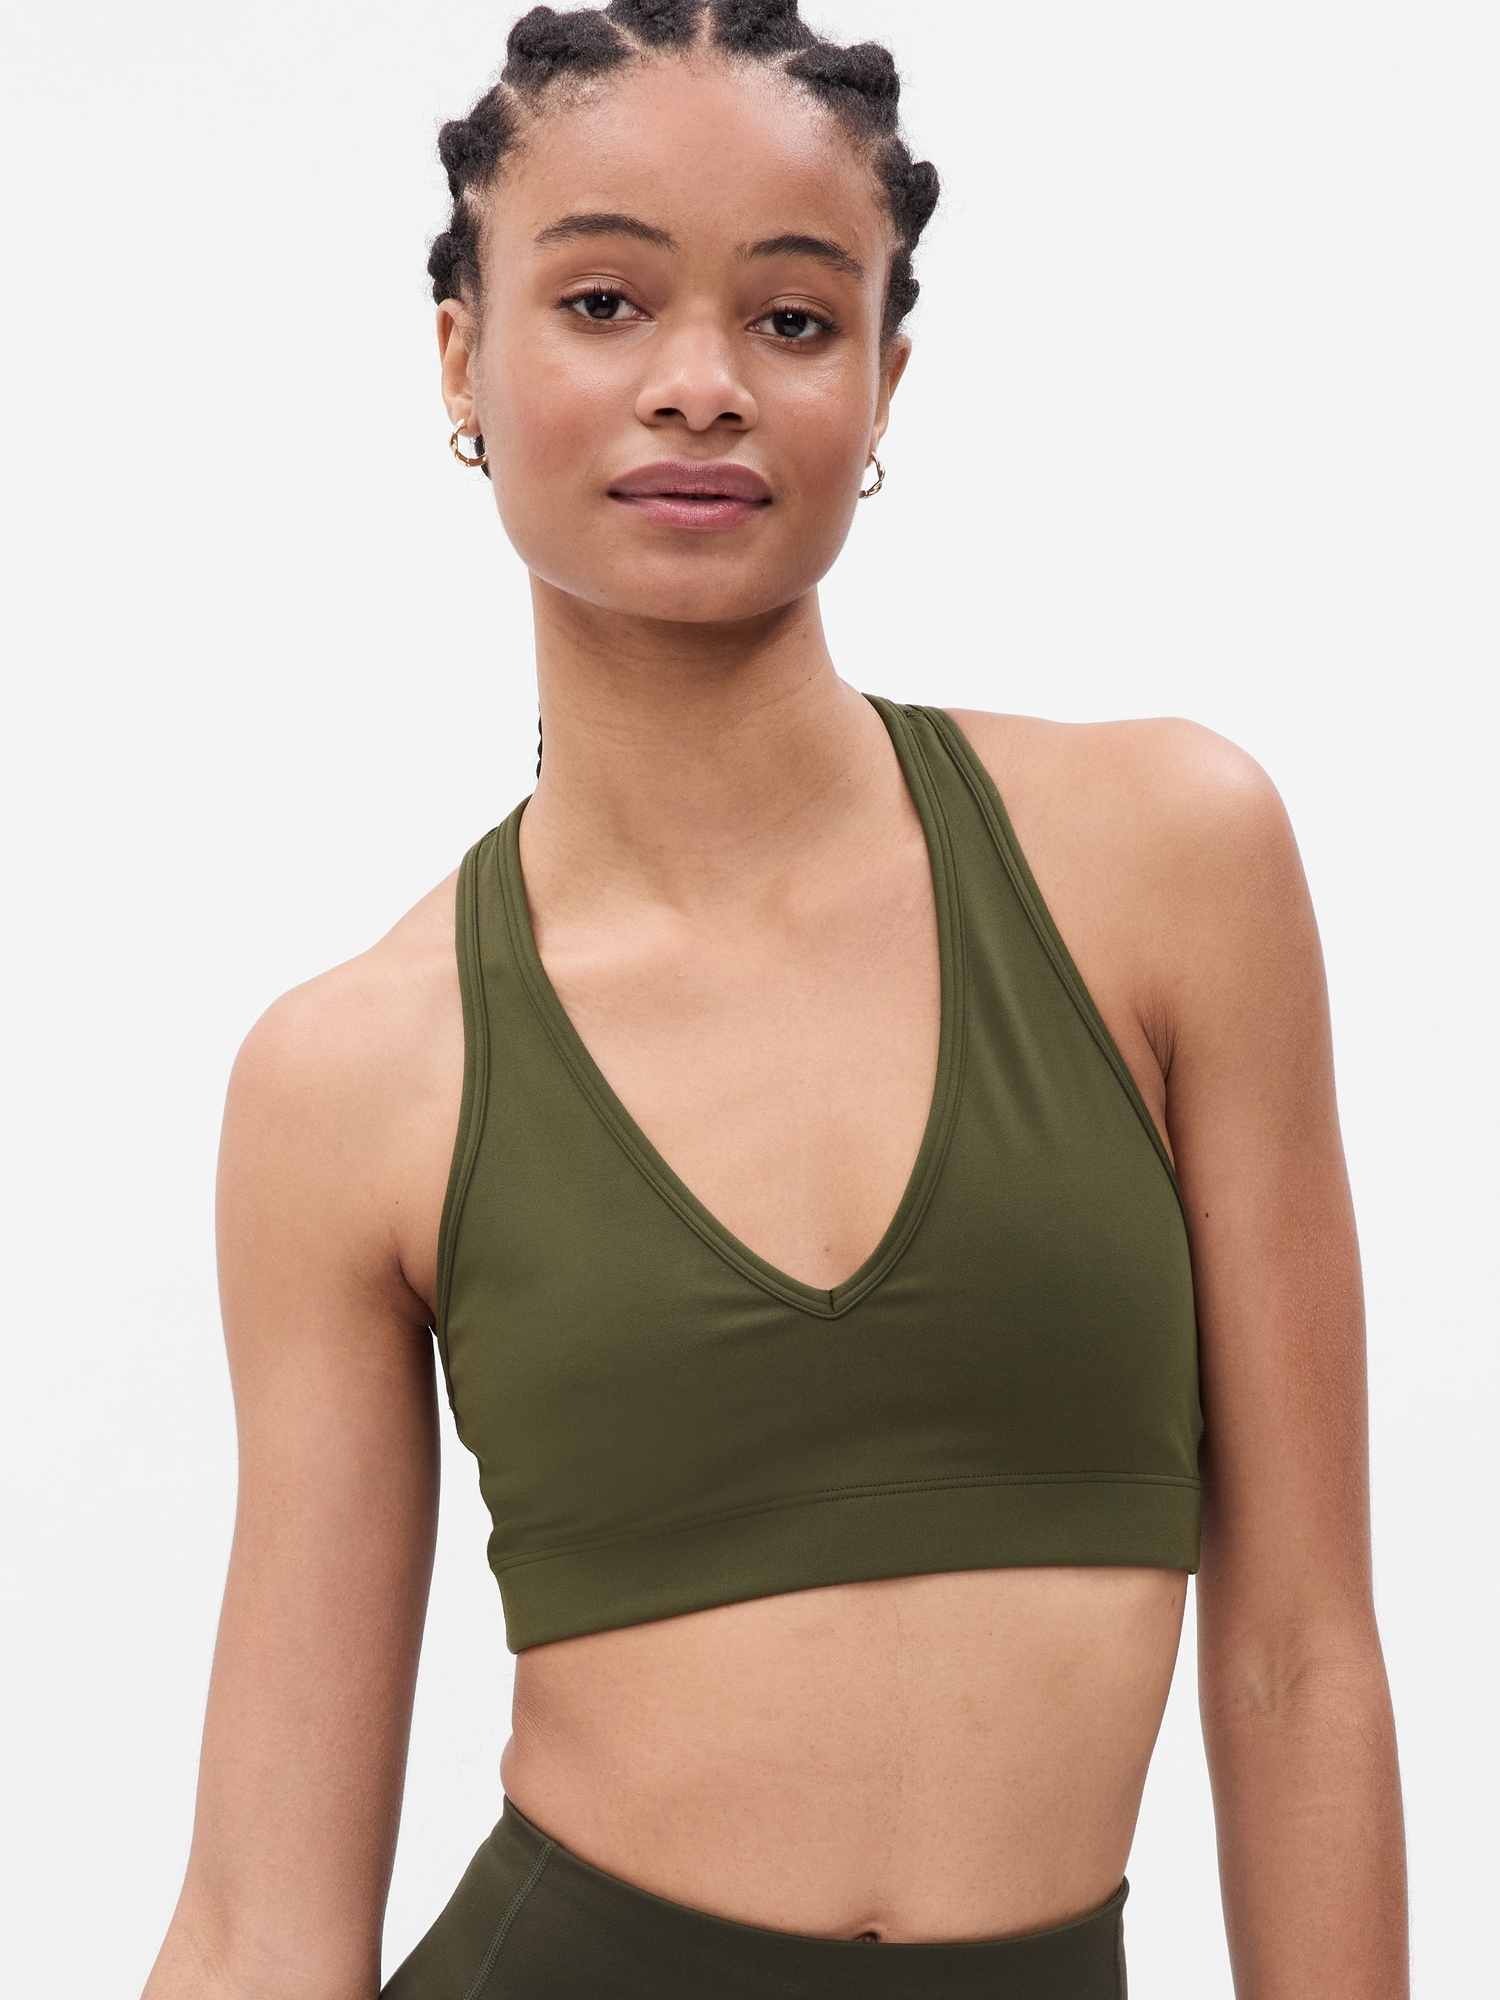 Gap Fit Sports Bra XXL Camo Green Strappy Low Support Lounge Removable Cups  New